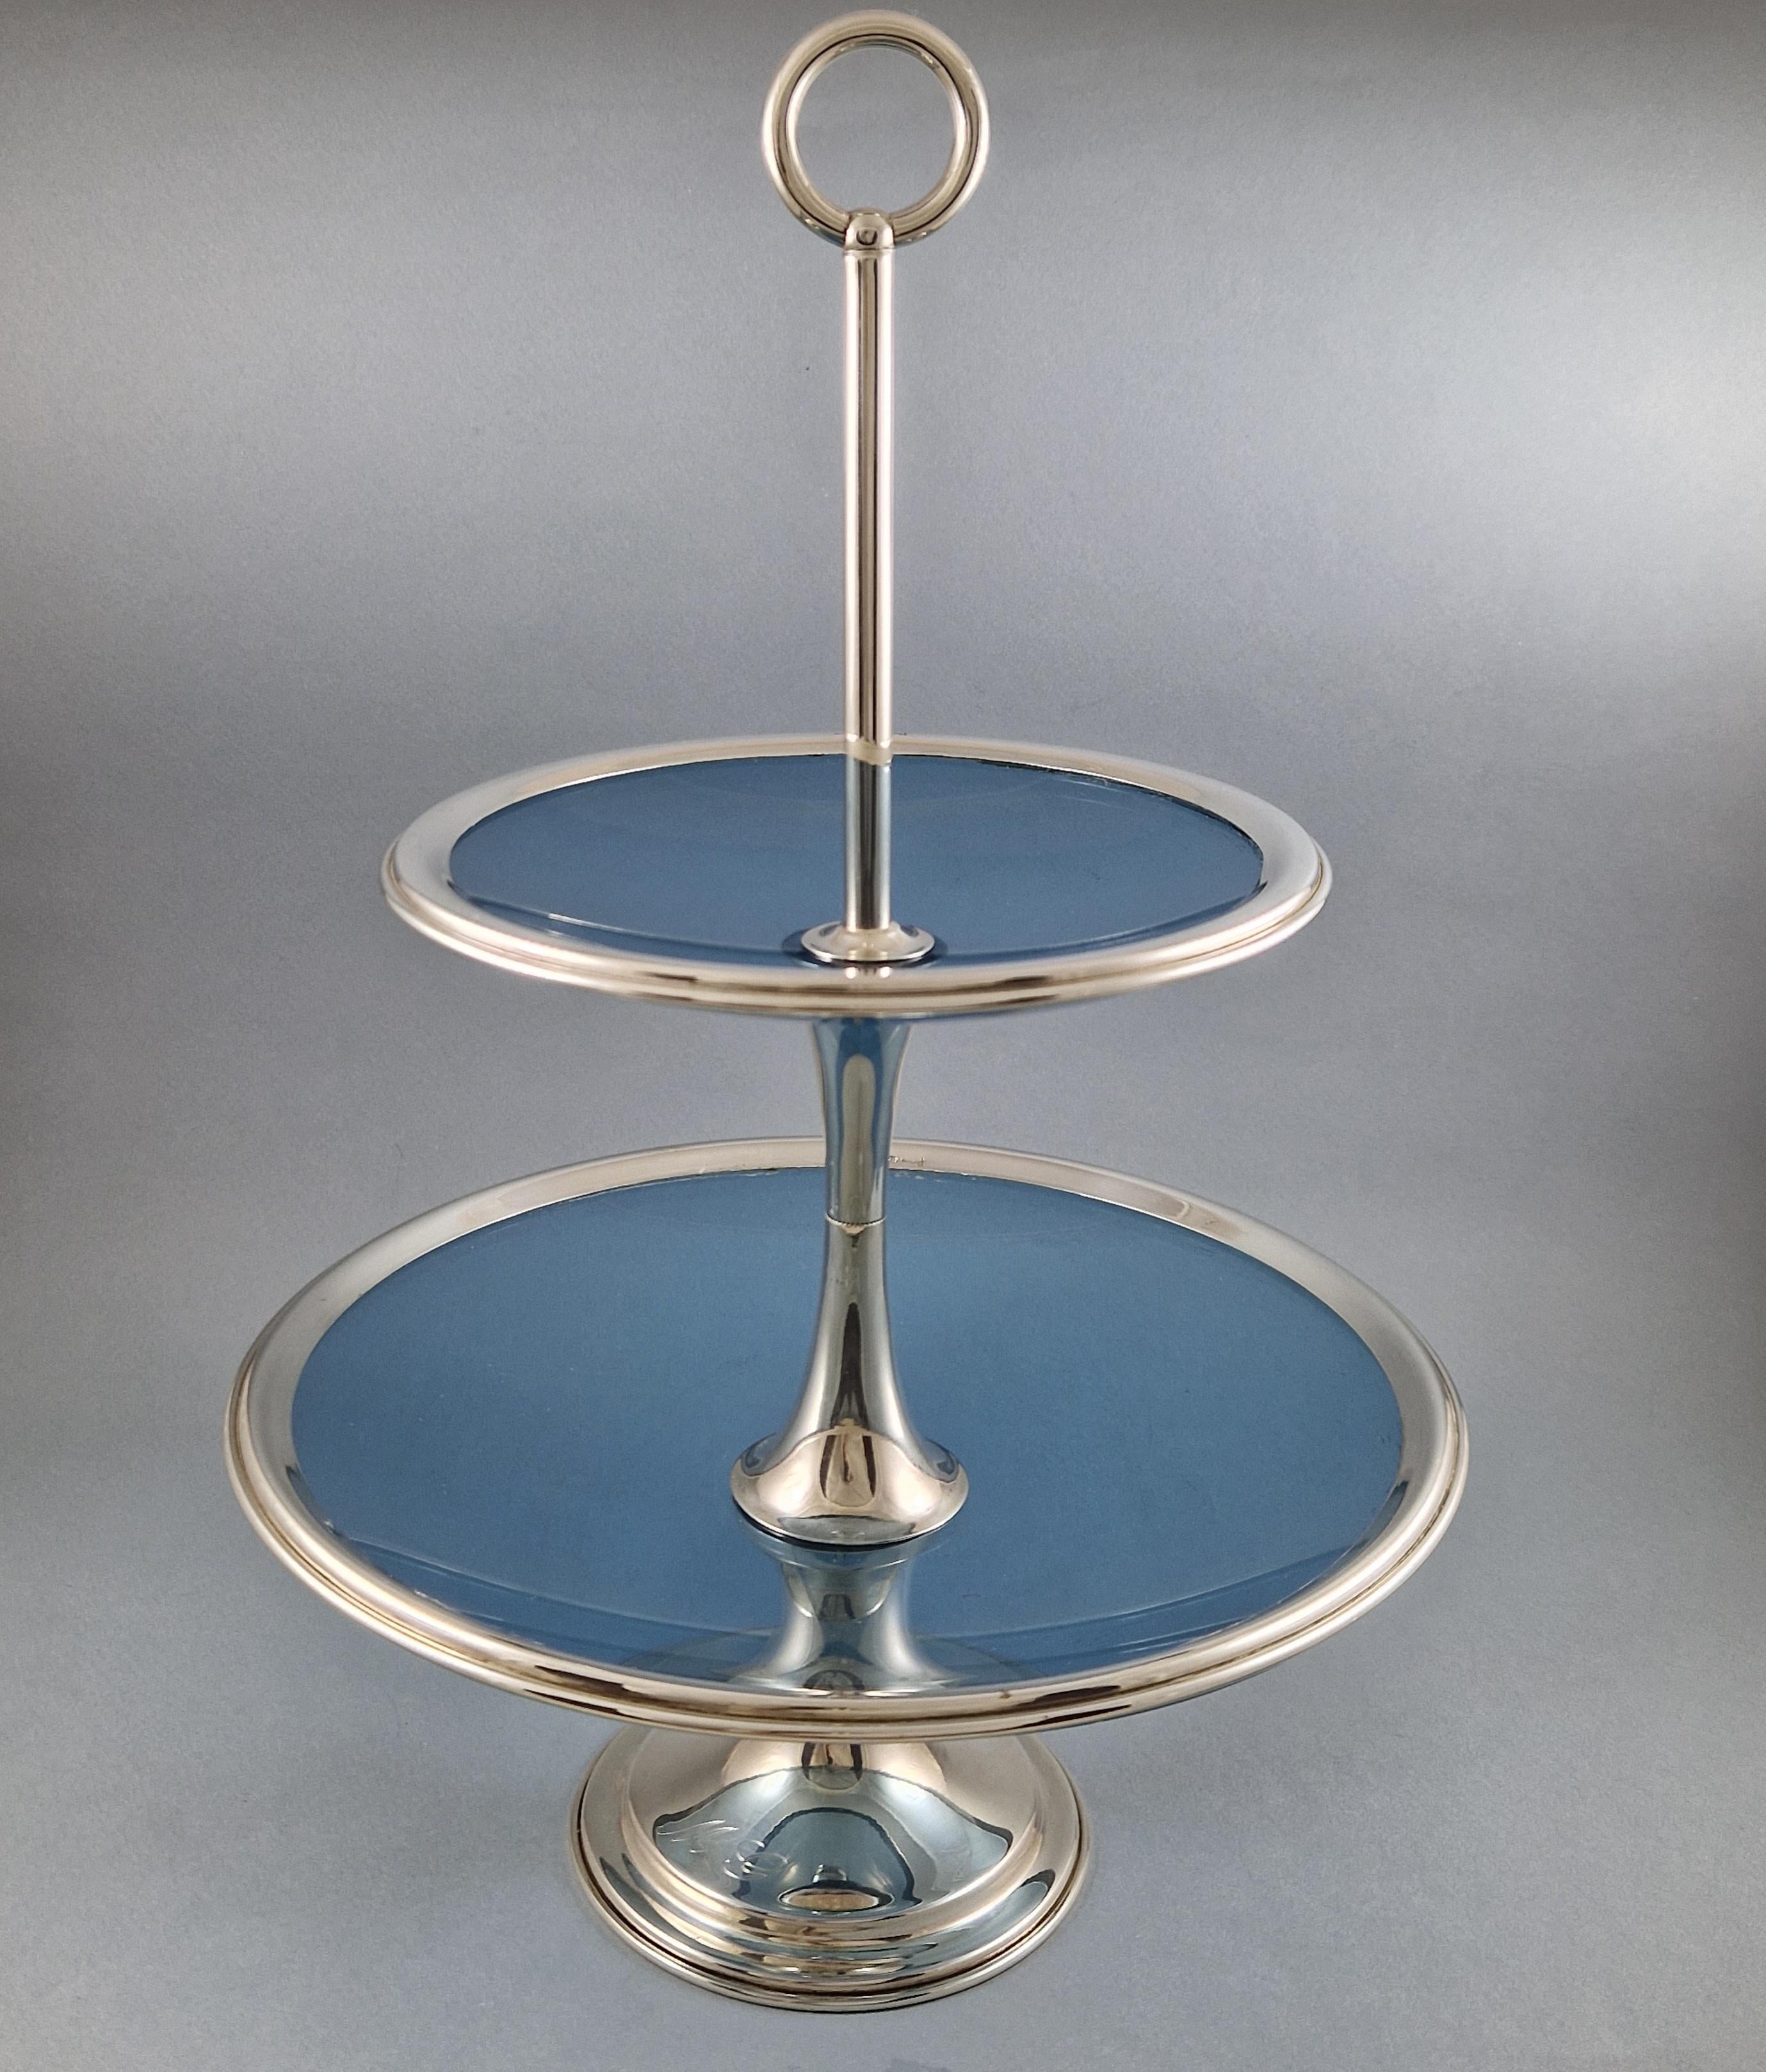 Pretty 2-tier cup in glass and sterling silver

925 silver hallmark
Measures: Height: 34.5 cm
Diameter: 17 and 23 cm

Great condition.